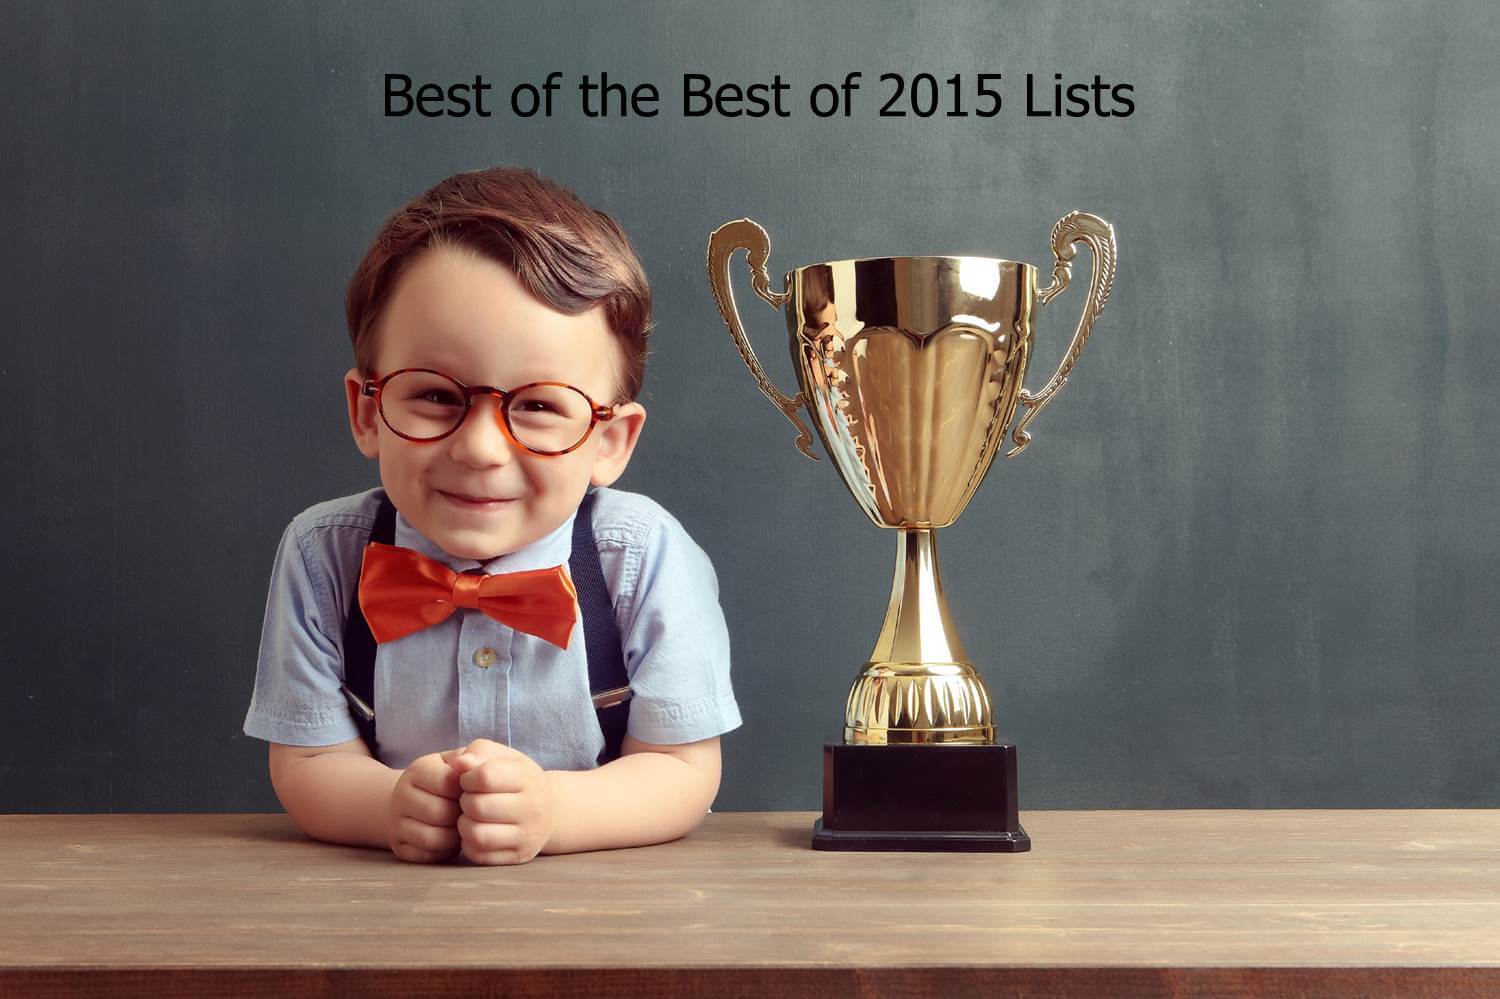 Rob’s Roundup: Best of the Best of 2015 Lists